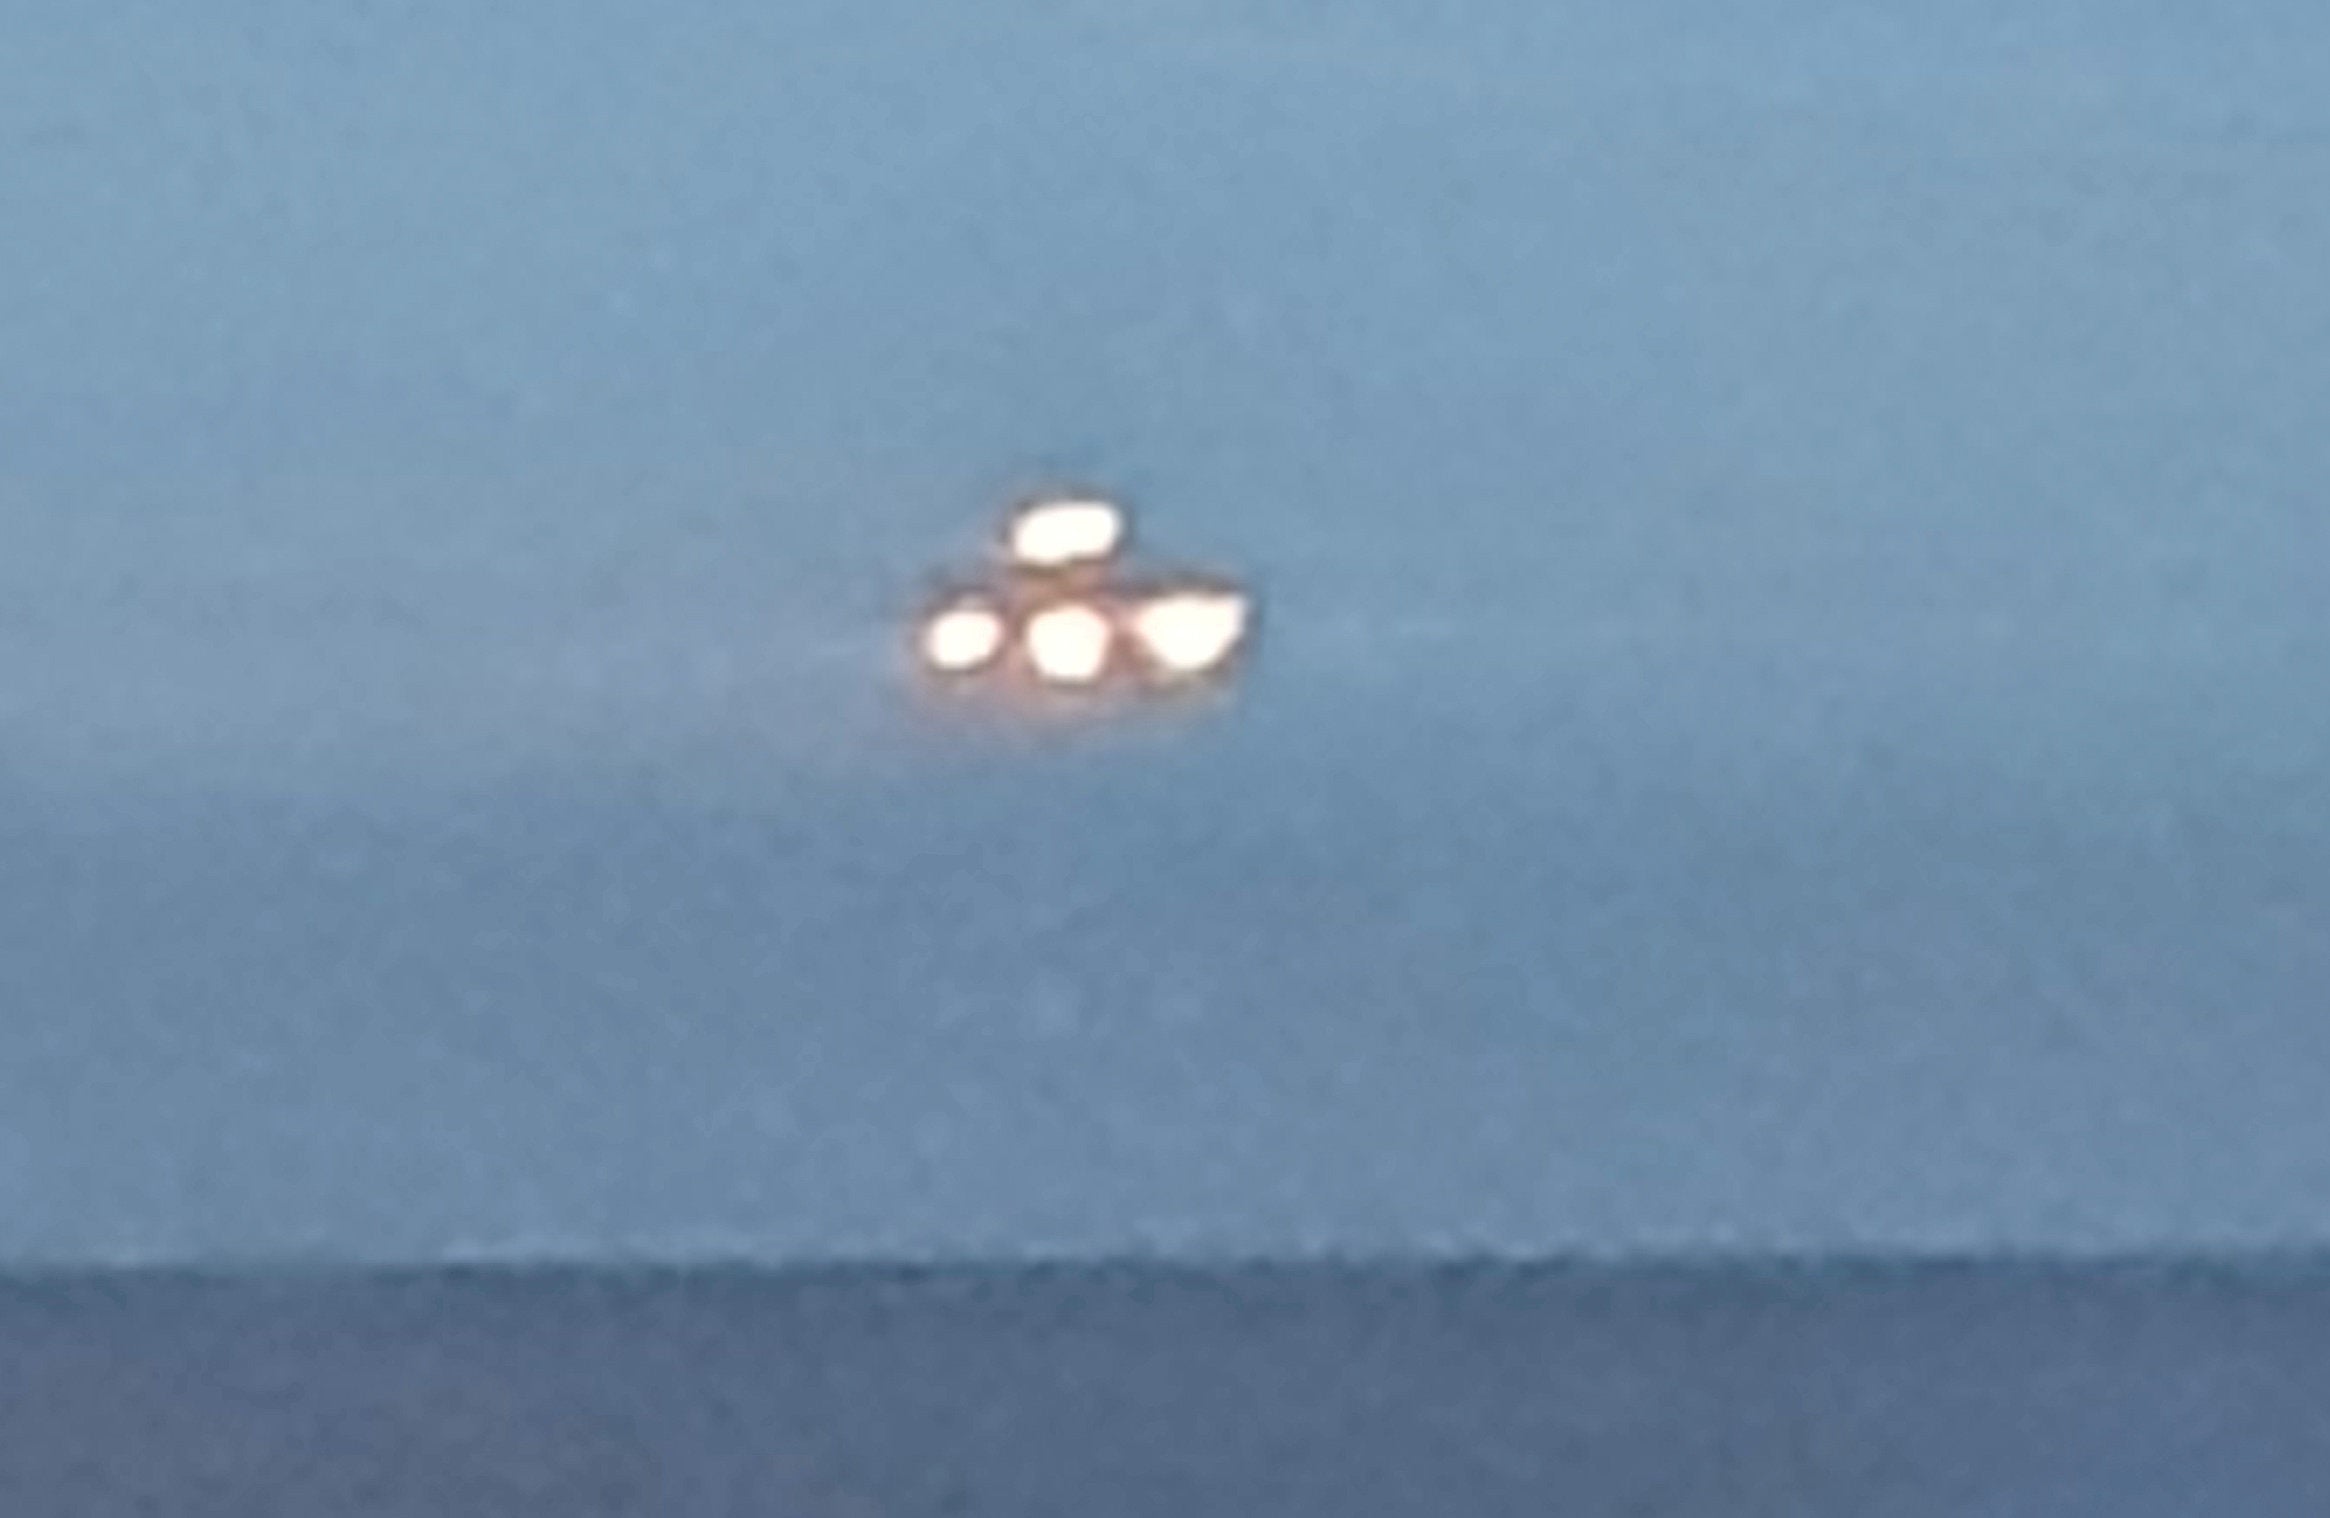 The picture of the large UFO captured by Matthew Evans in Devon